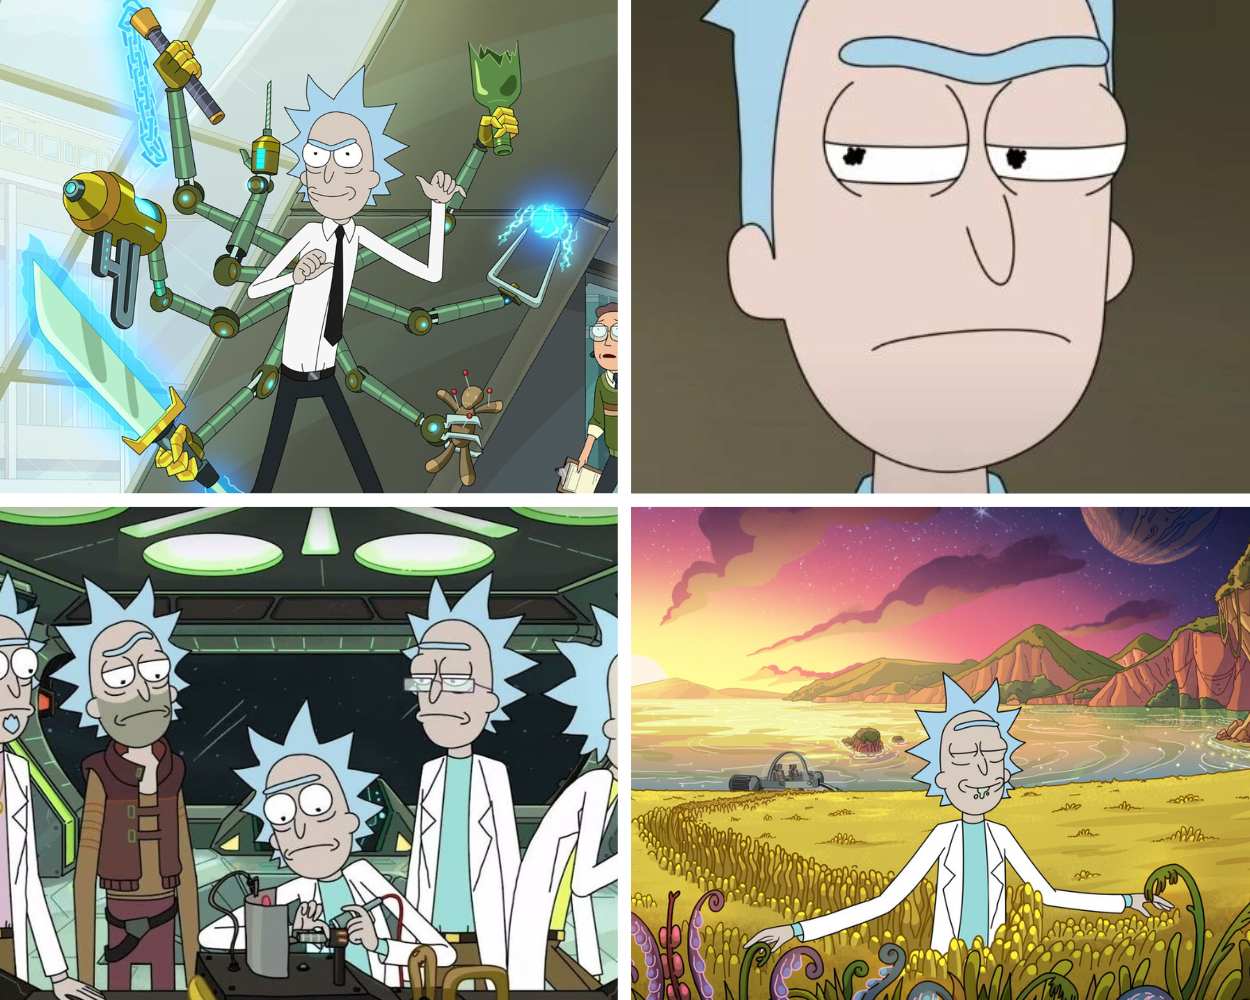 Rick Sanchez- Male Cartoon Character With Spiked Hair